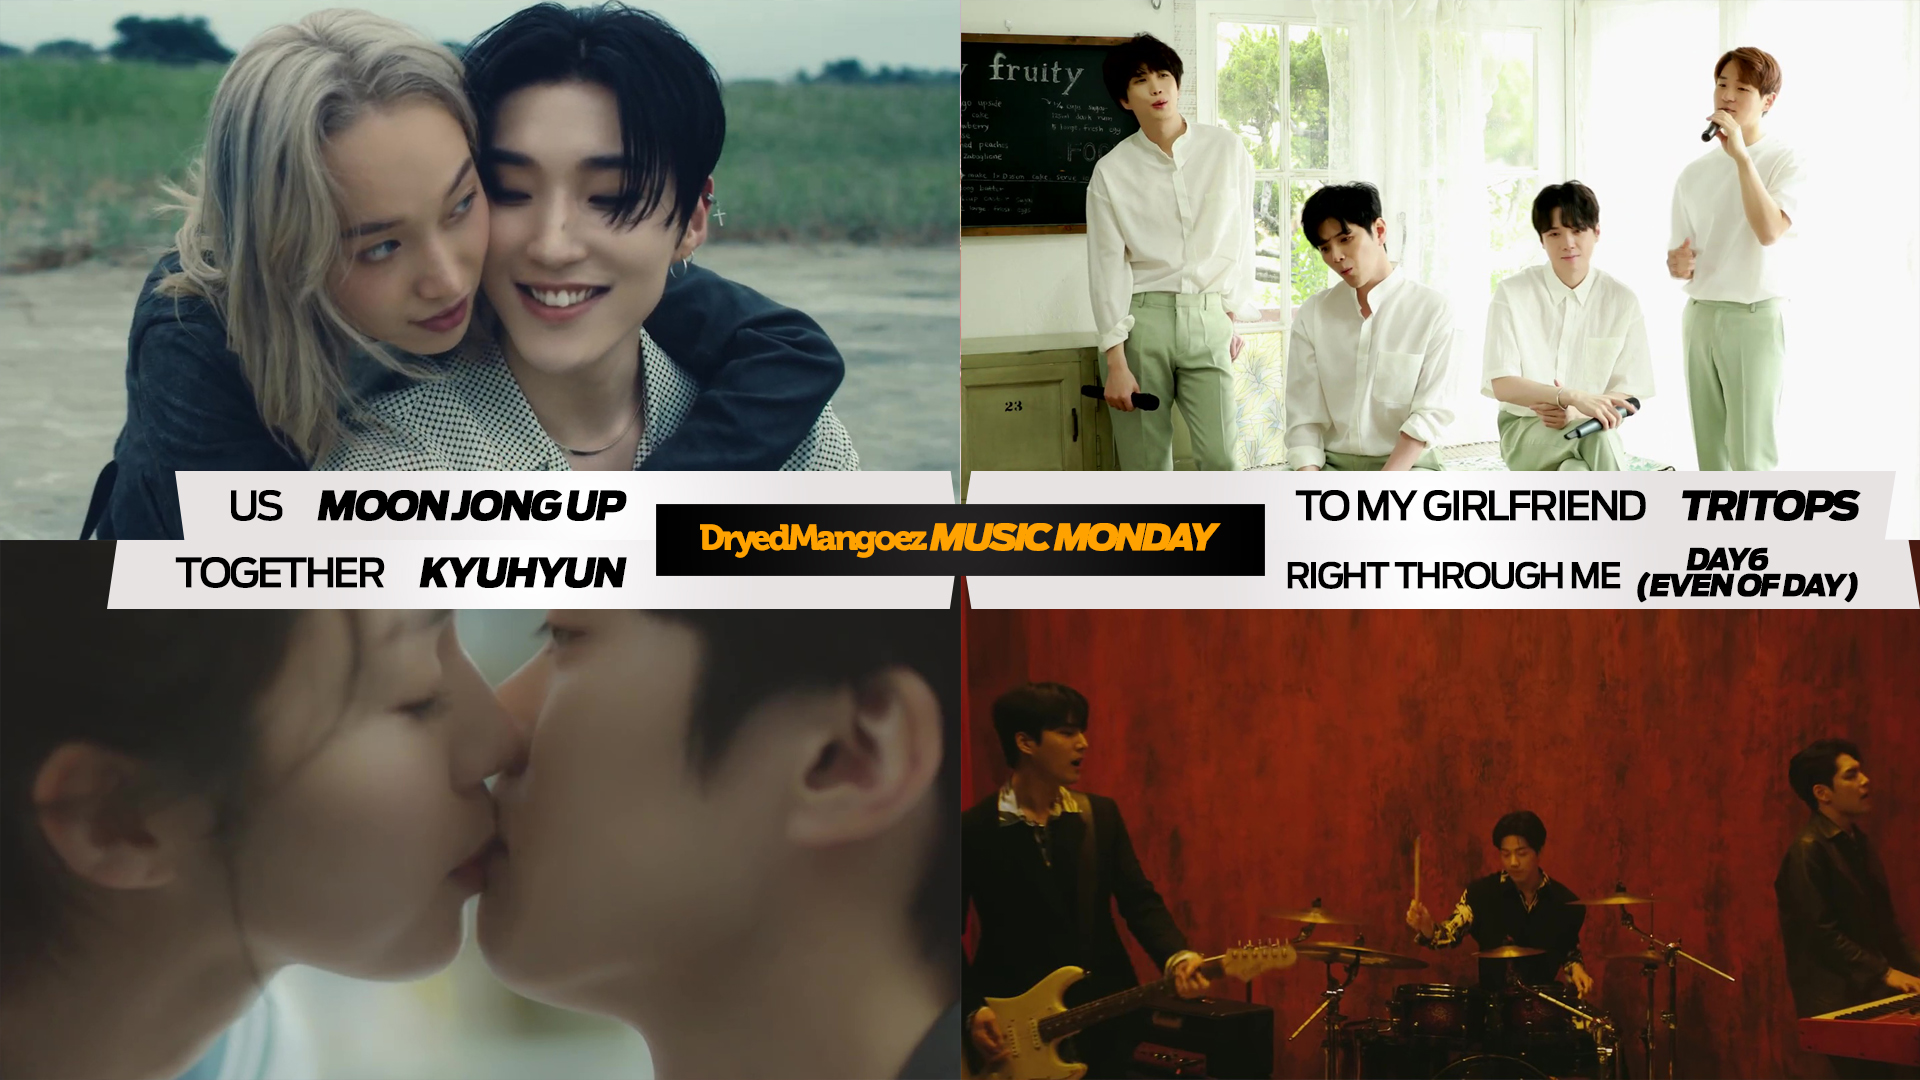 Music Monday, July 12, 2021 – Moon Jong Up, TRITOPS, Kyuhyun, DAY6 (Even of Day)